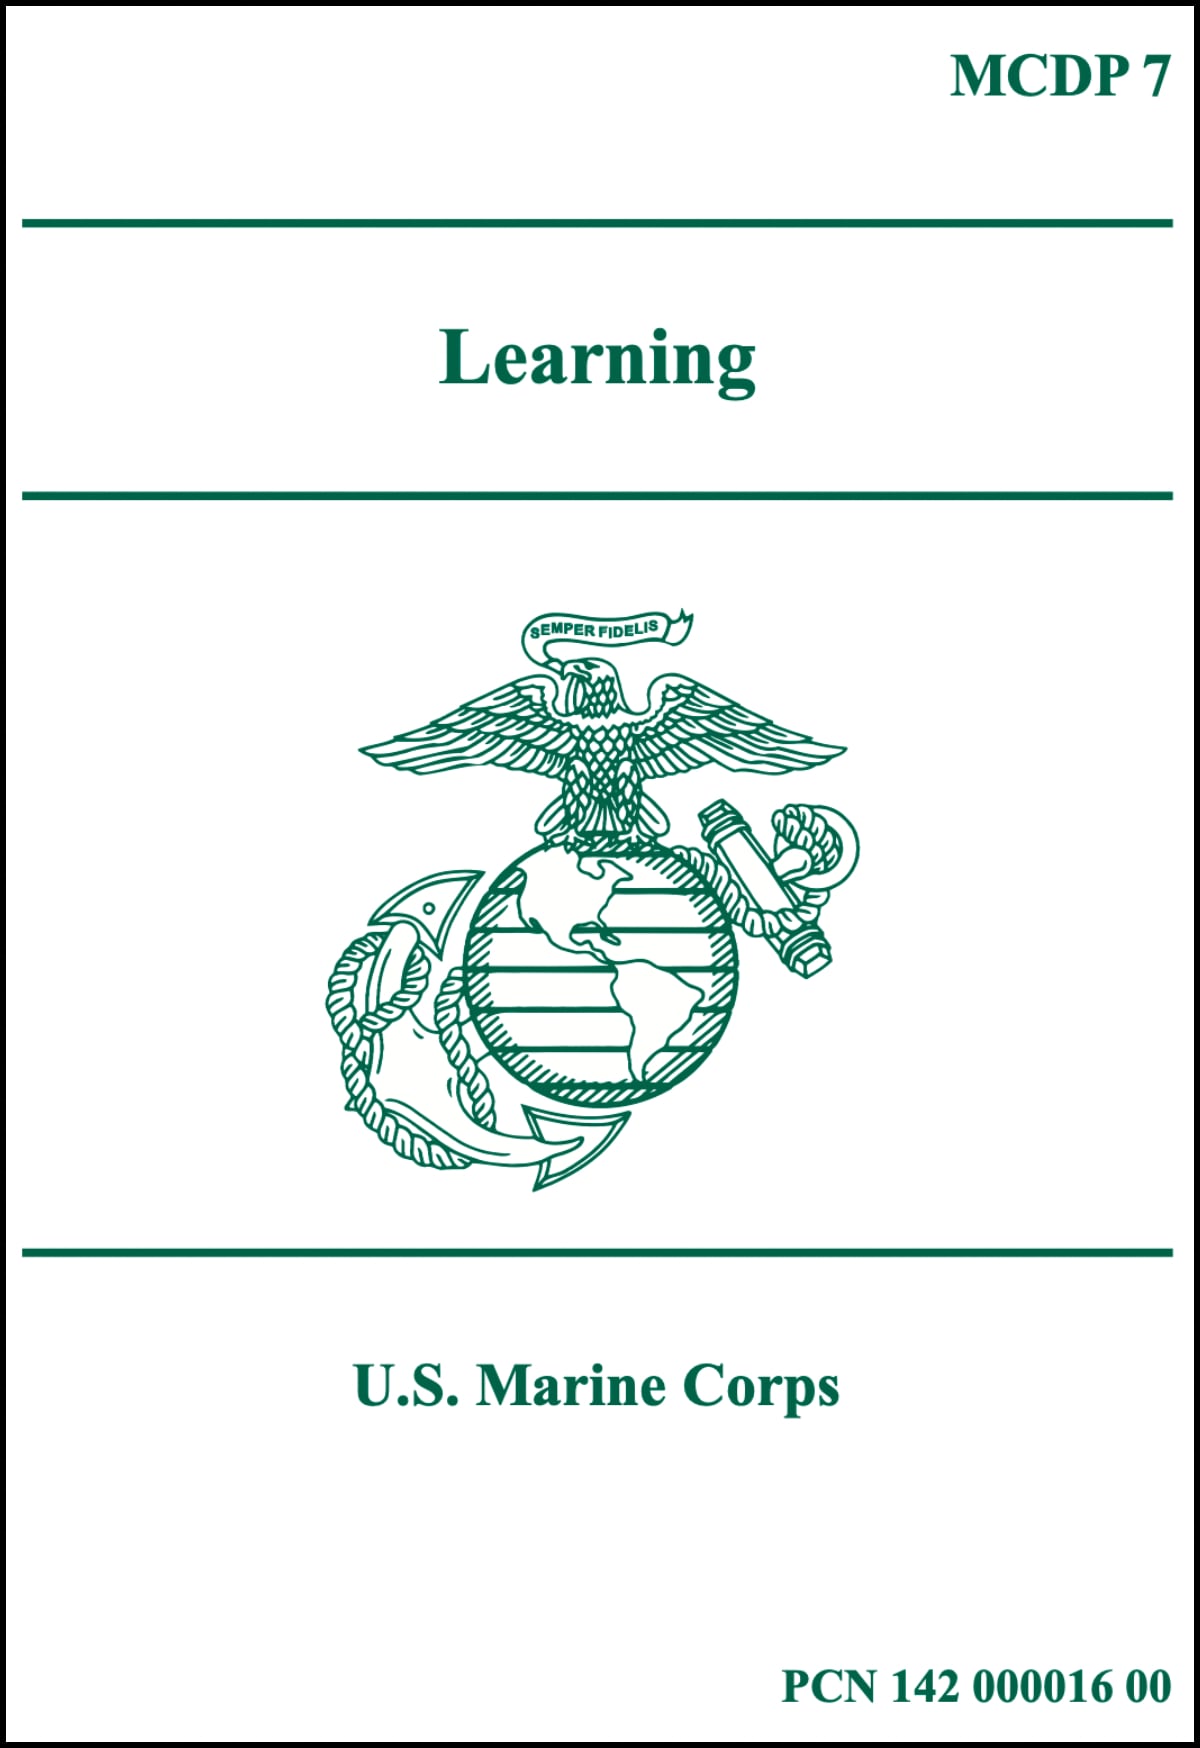 MCDP 7 Learning Cover